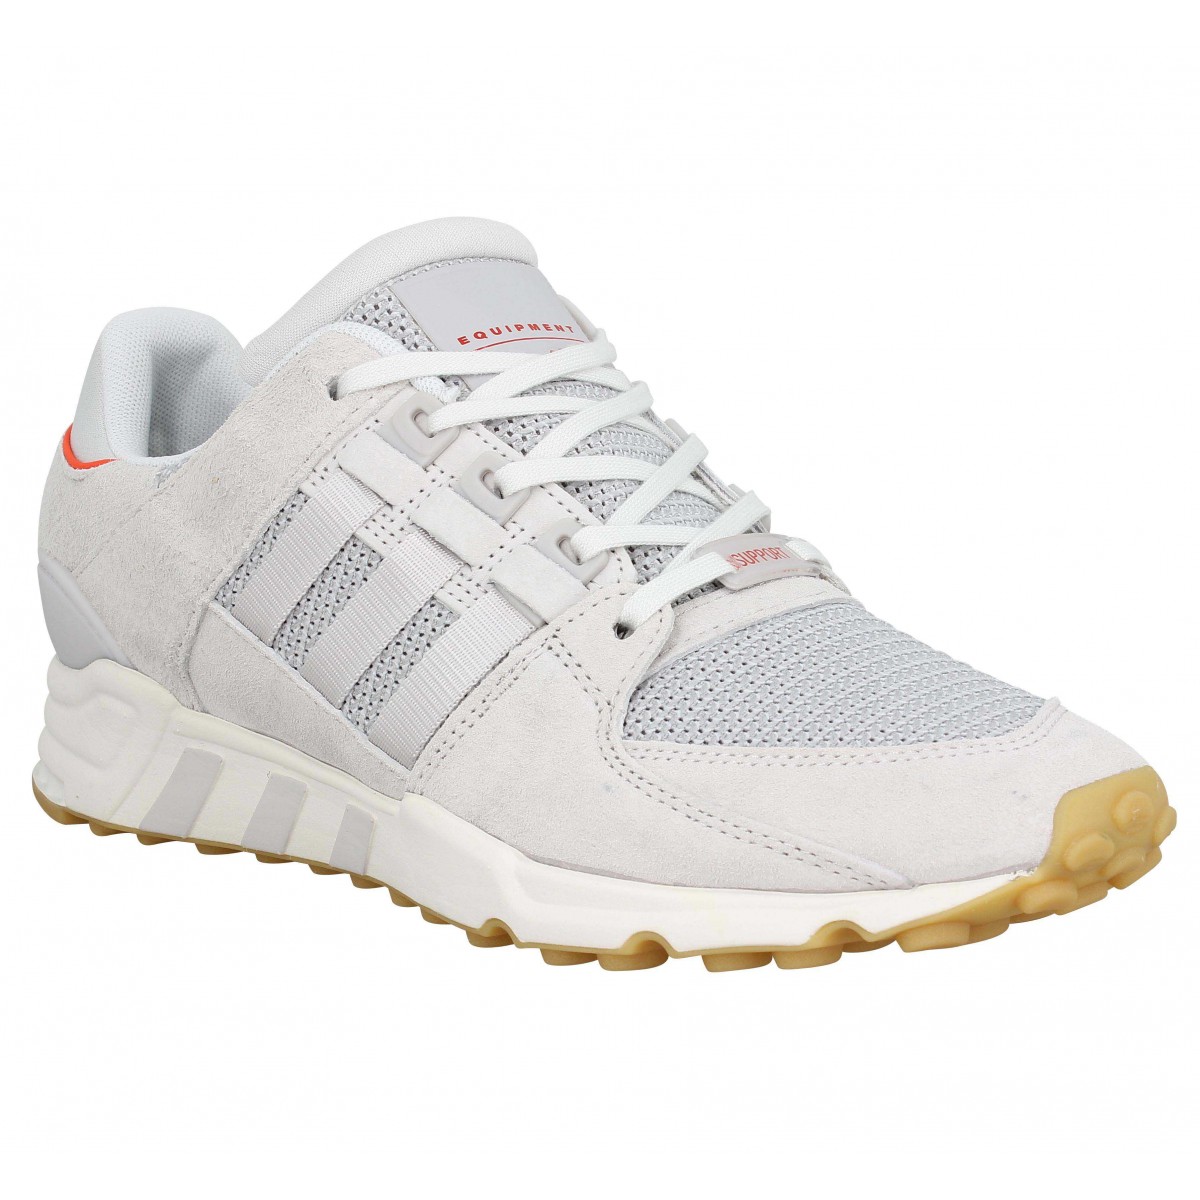 adidas eqt support rf homme